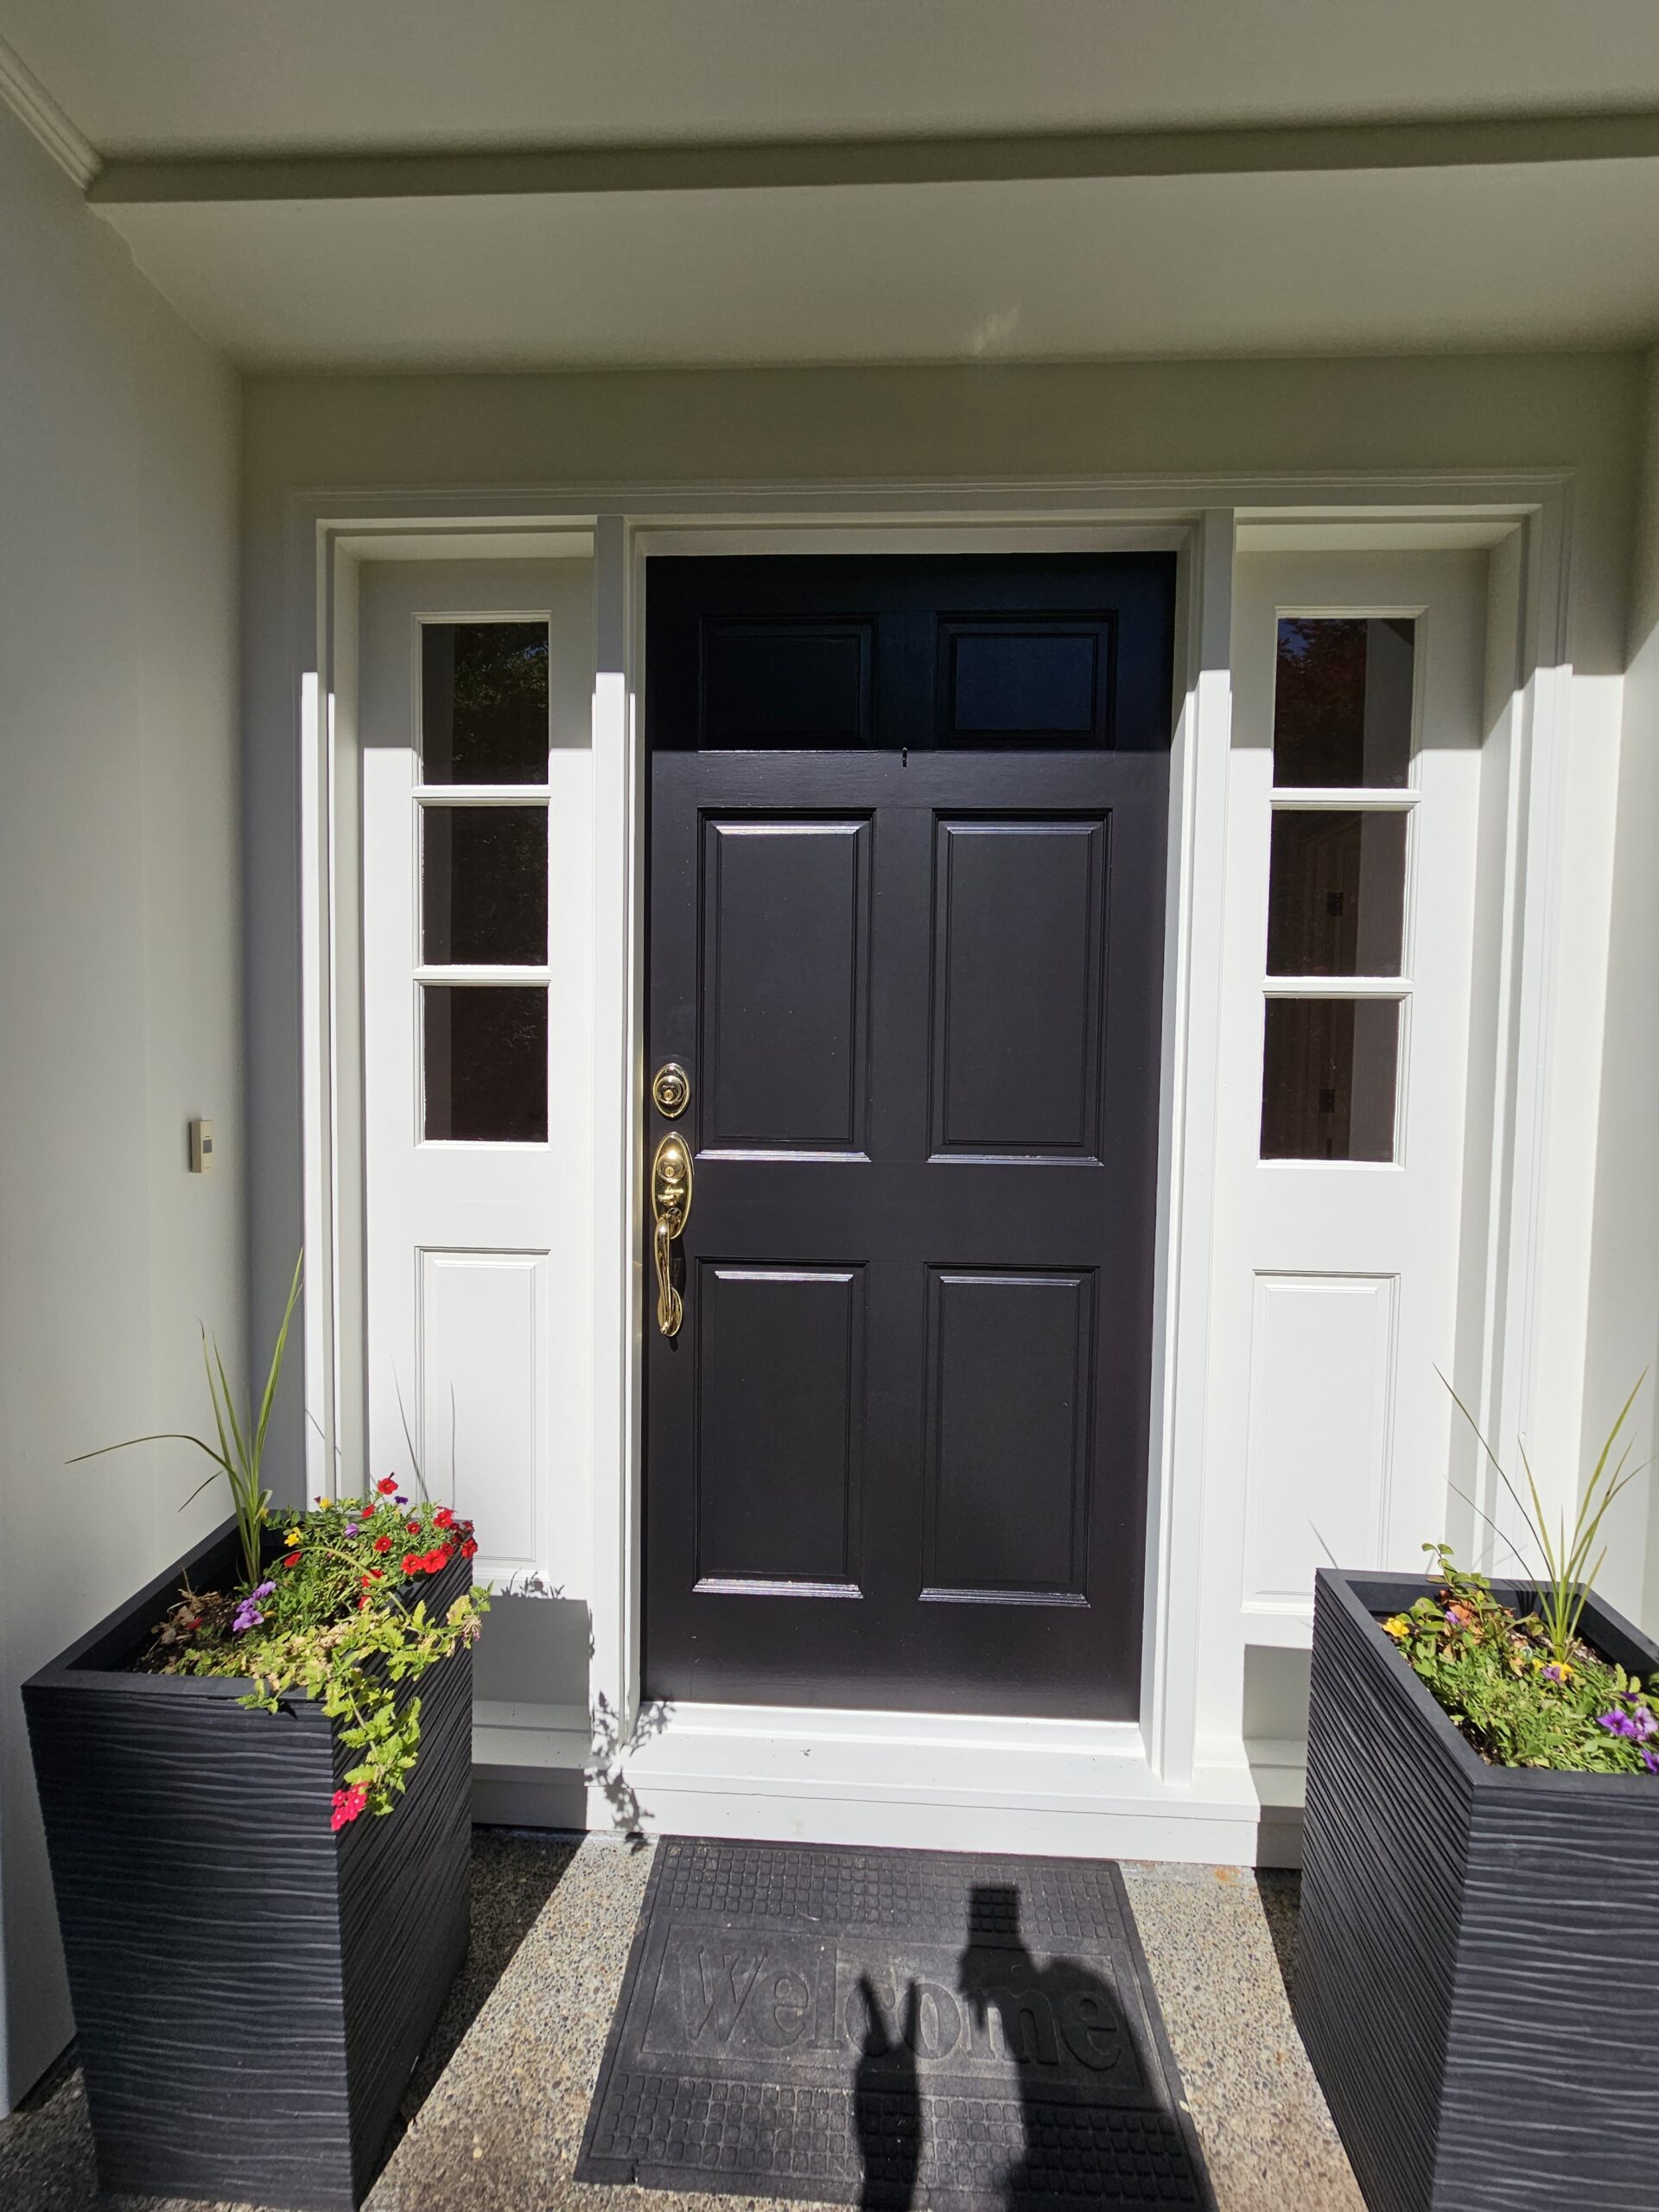 A revitalizing home in Portland Park with a black front door and planters in front of it.